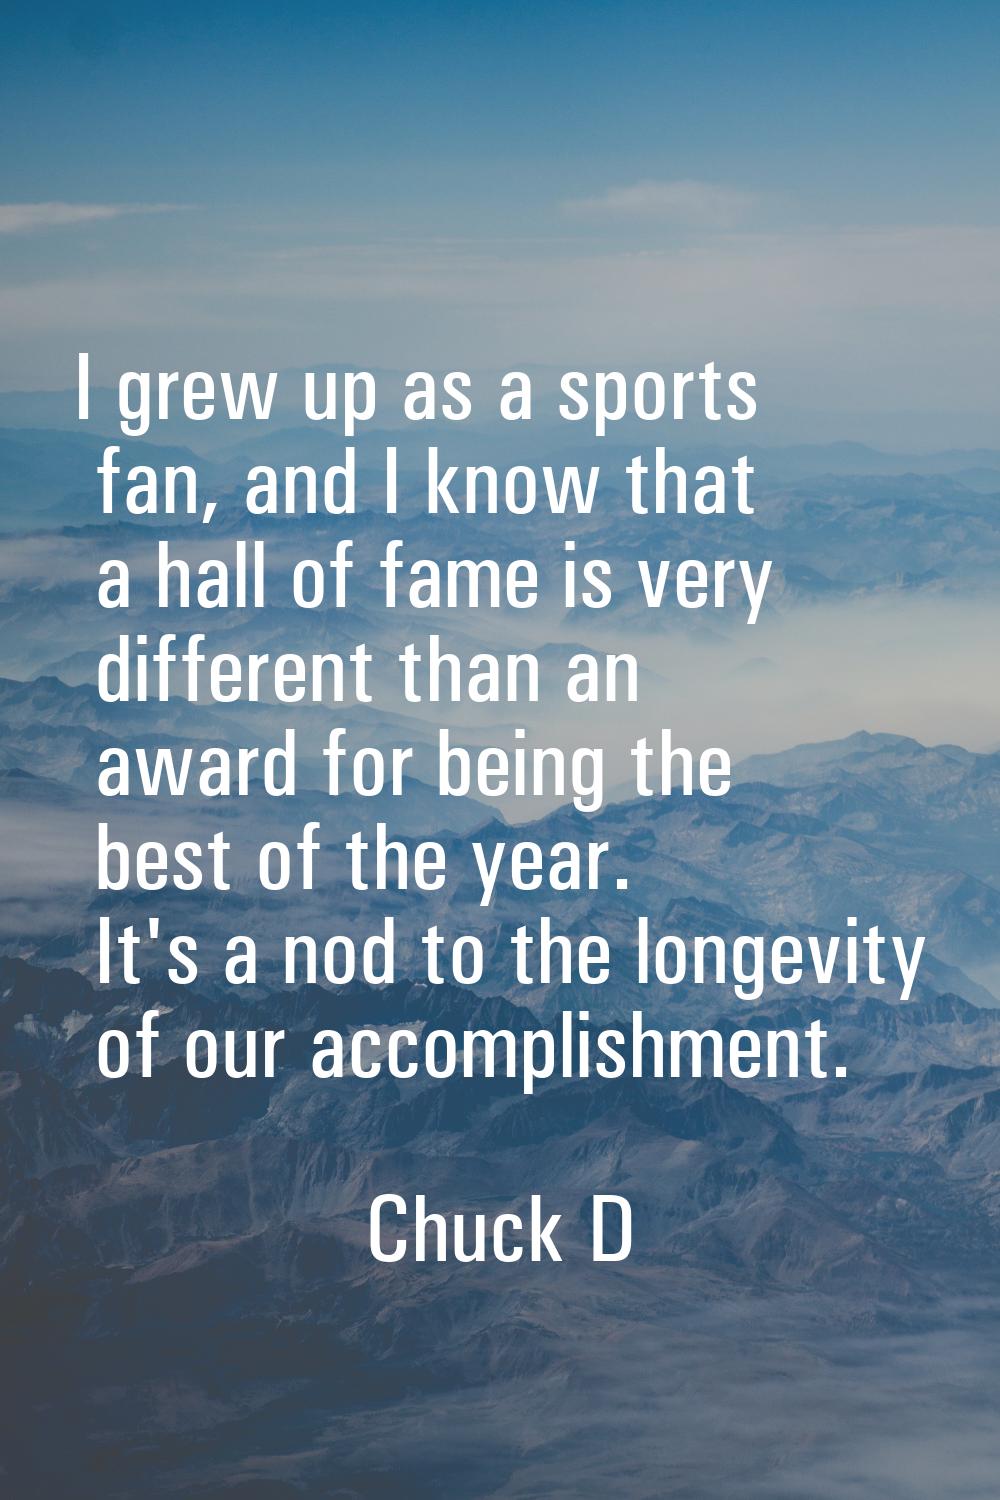 I grew up as a sports fan, and I know that a hall of fame is very different than an award for being